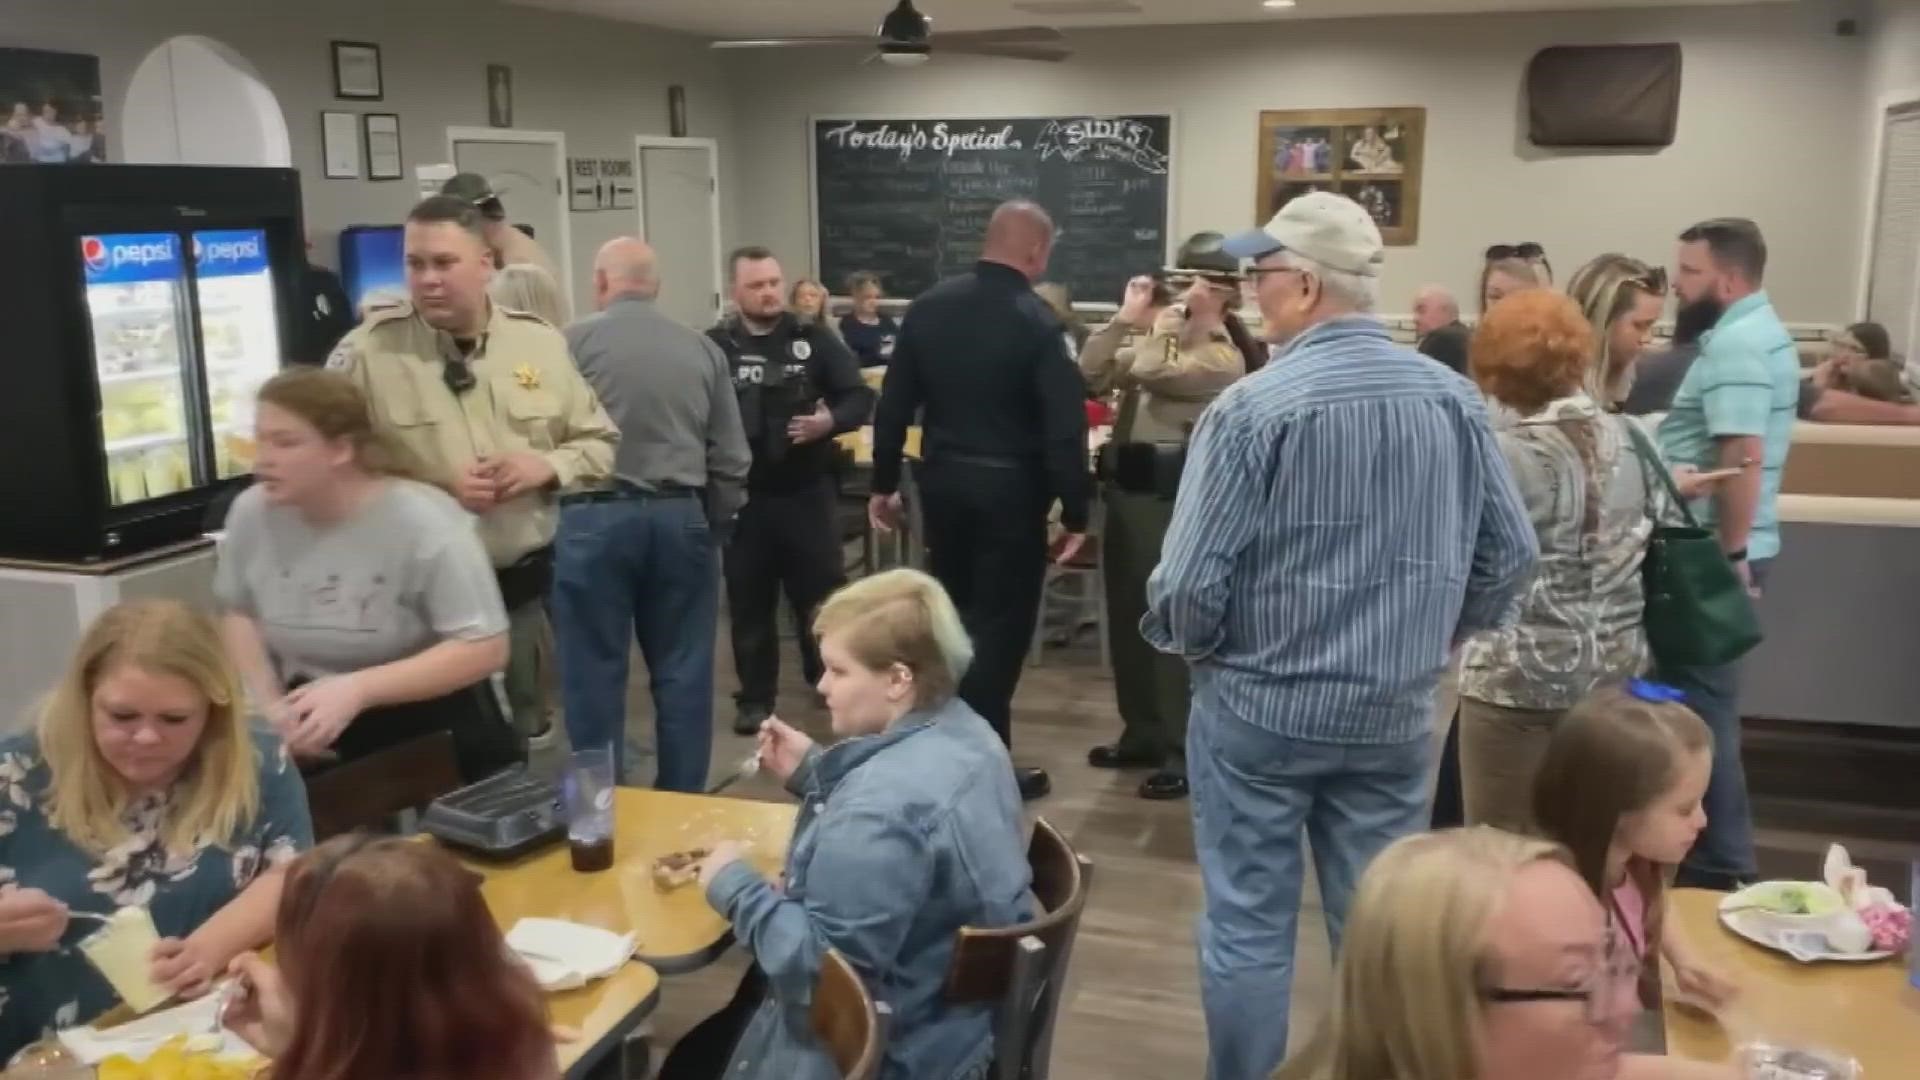 The "Tip-a-Cop" fundraiser invited people to eat at a restaurant and be served by law enforcement officers.